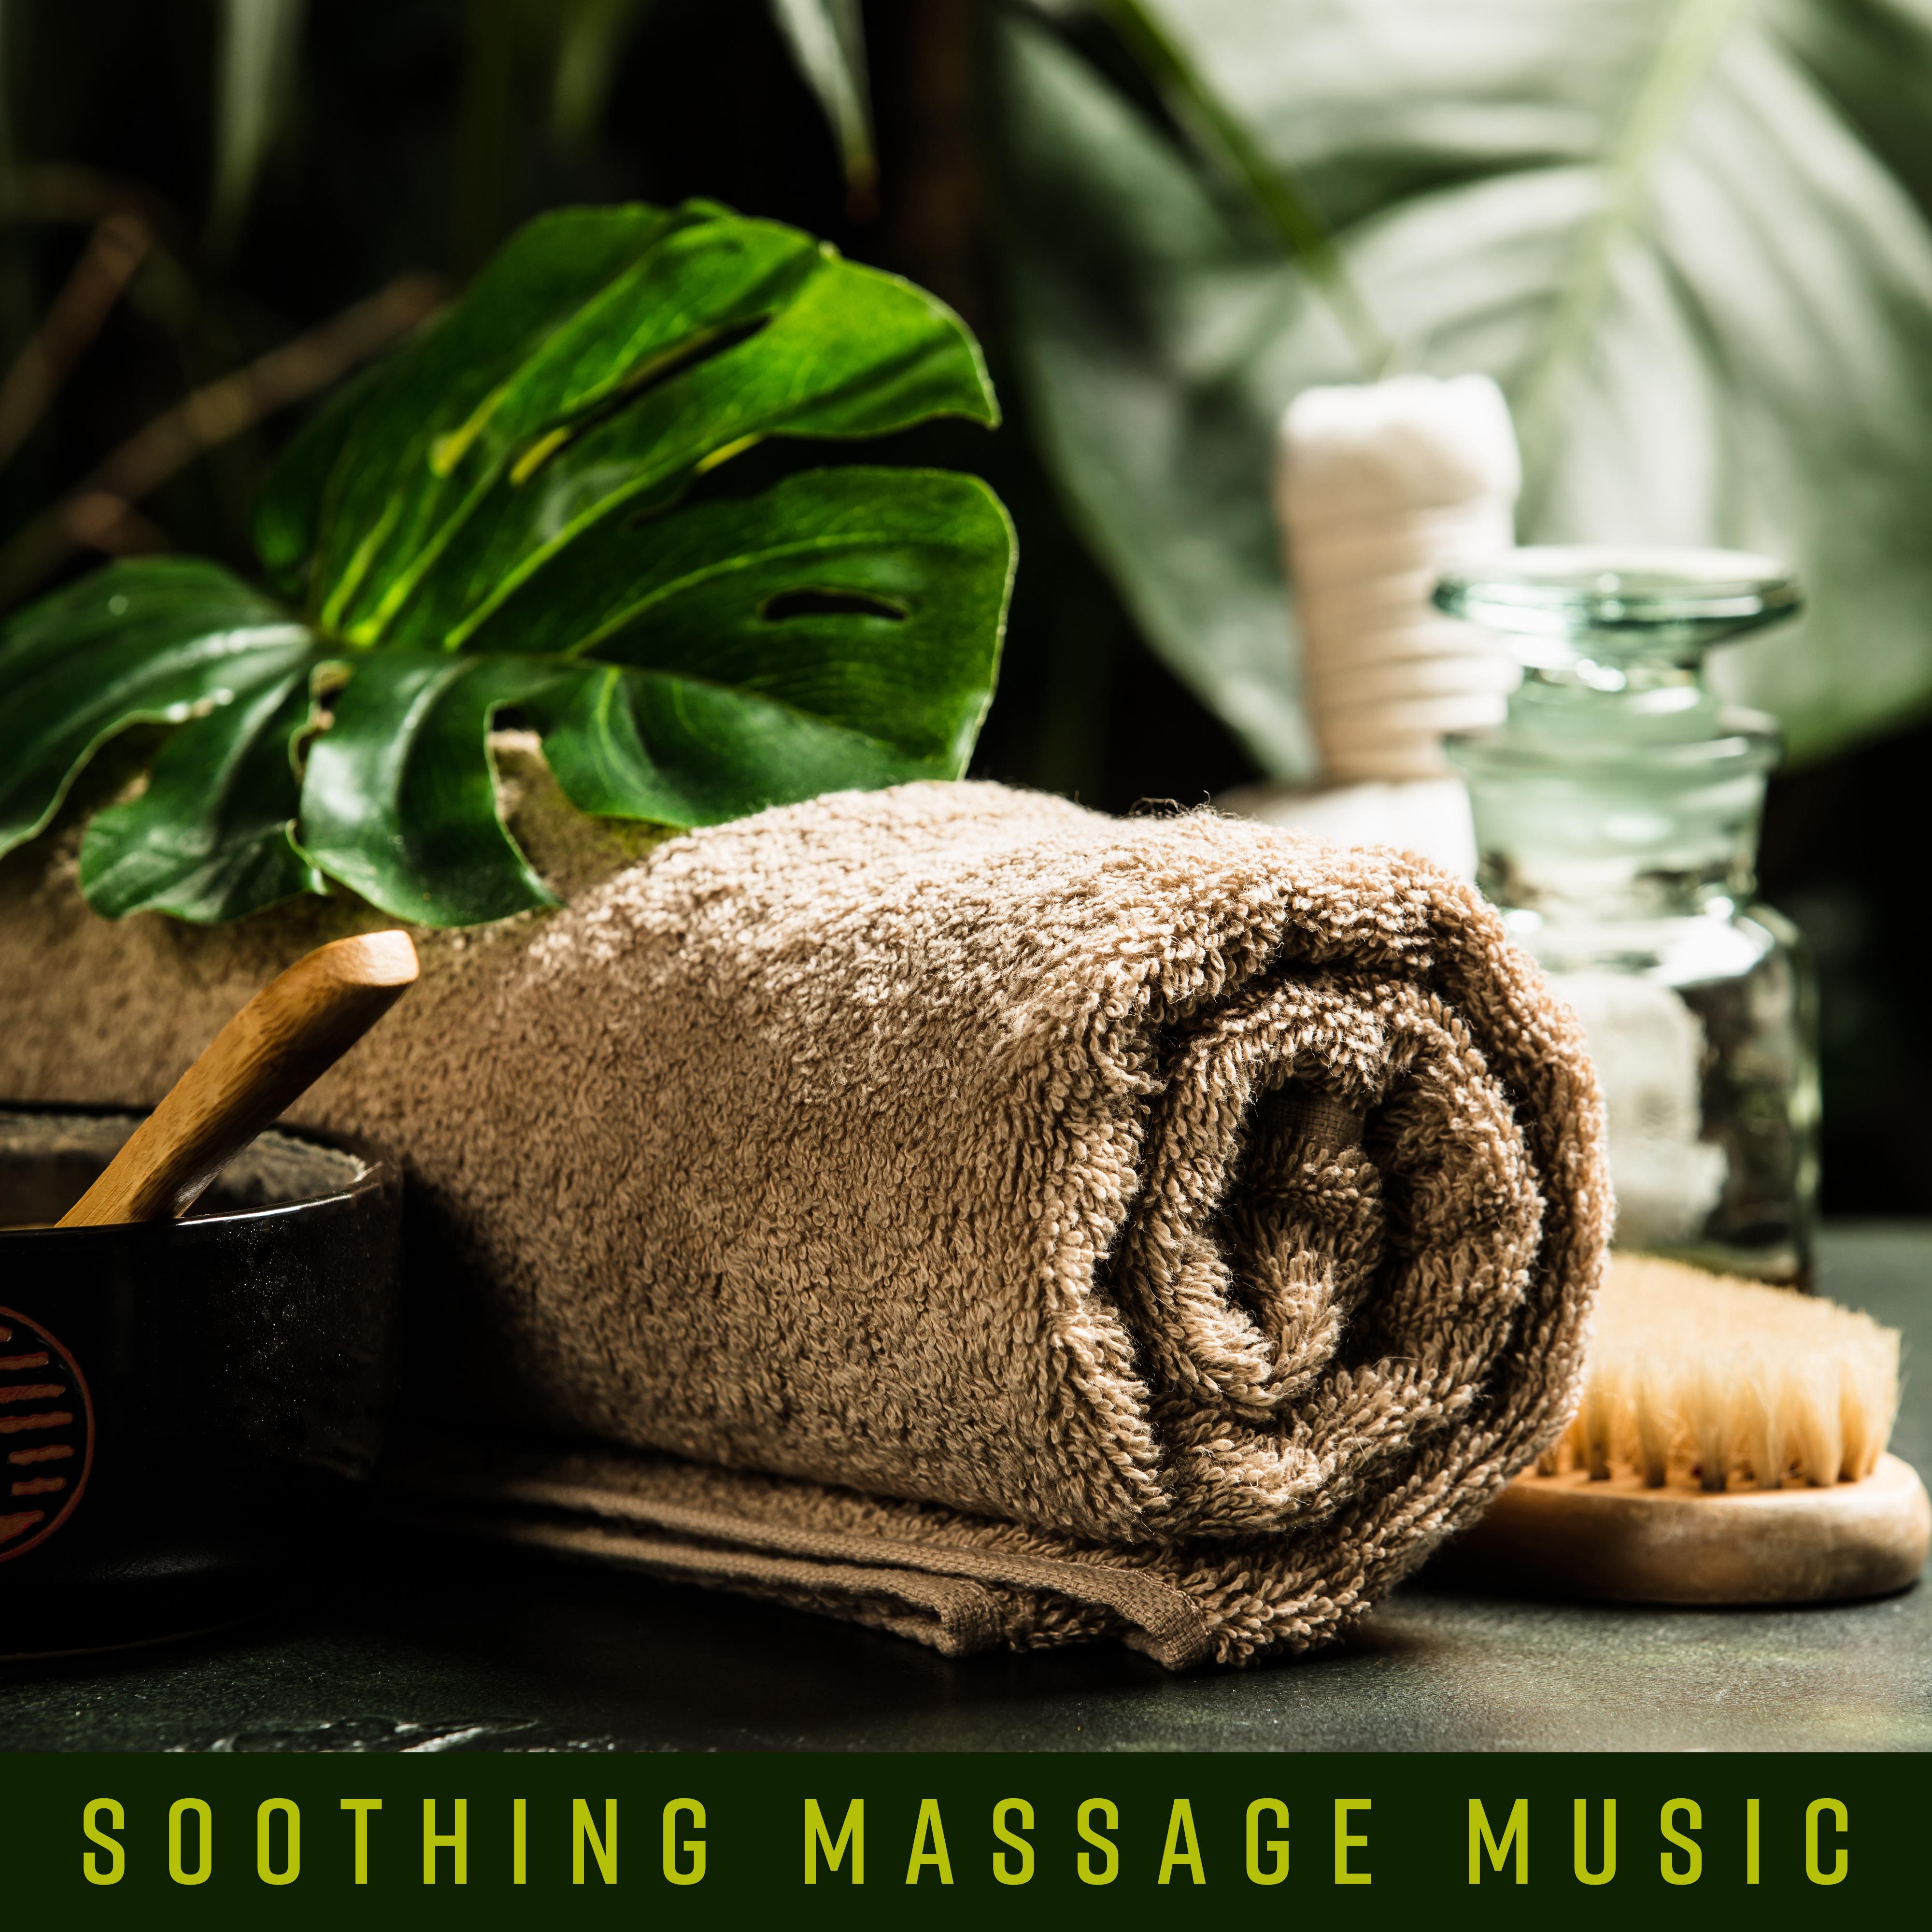 Soothing Massage Music  Antistress Music, Relax Zone, Zen Spa, Pure Relaxation, Therapy Spa, Relaxing Music to Calm Down, Sleep, Wellness